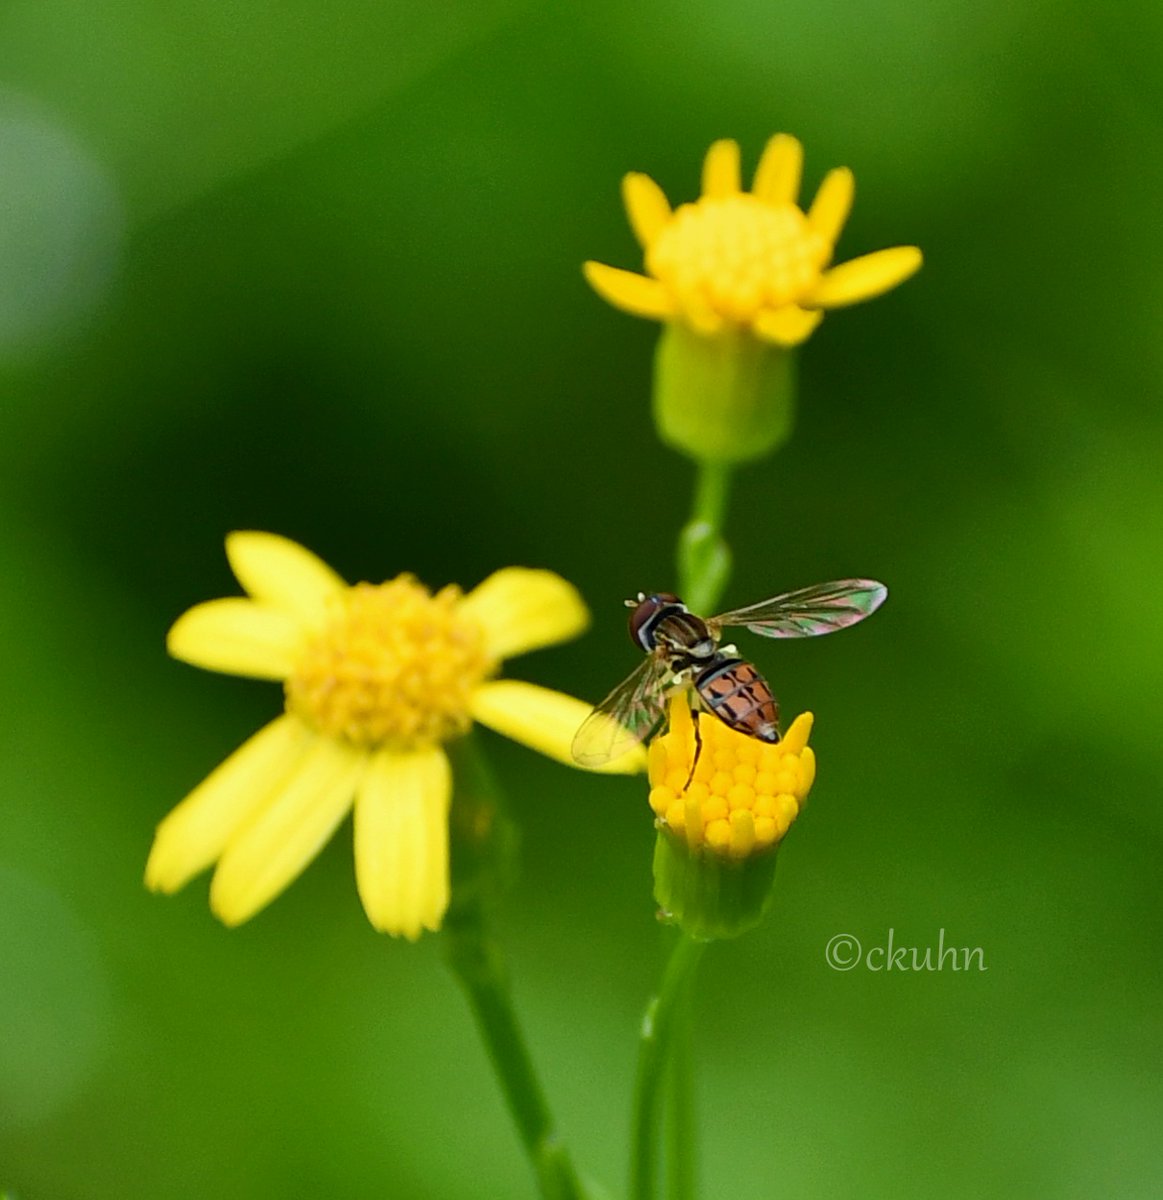 It's been a rainy #MacroMonday, but this hover fly was busy. #Insects #Flowers